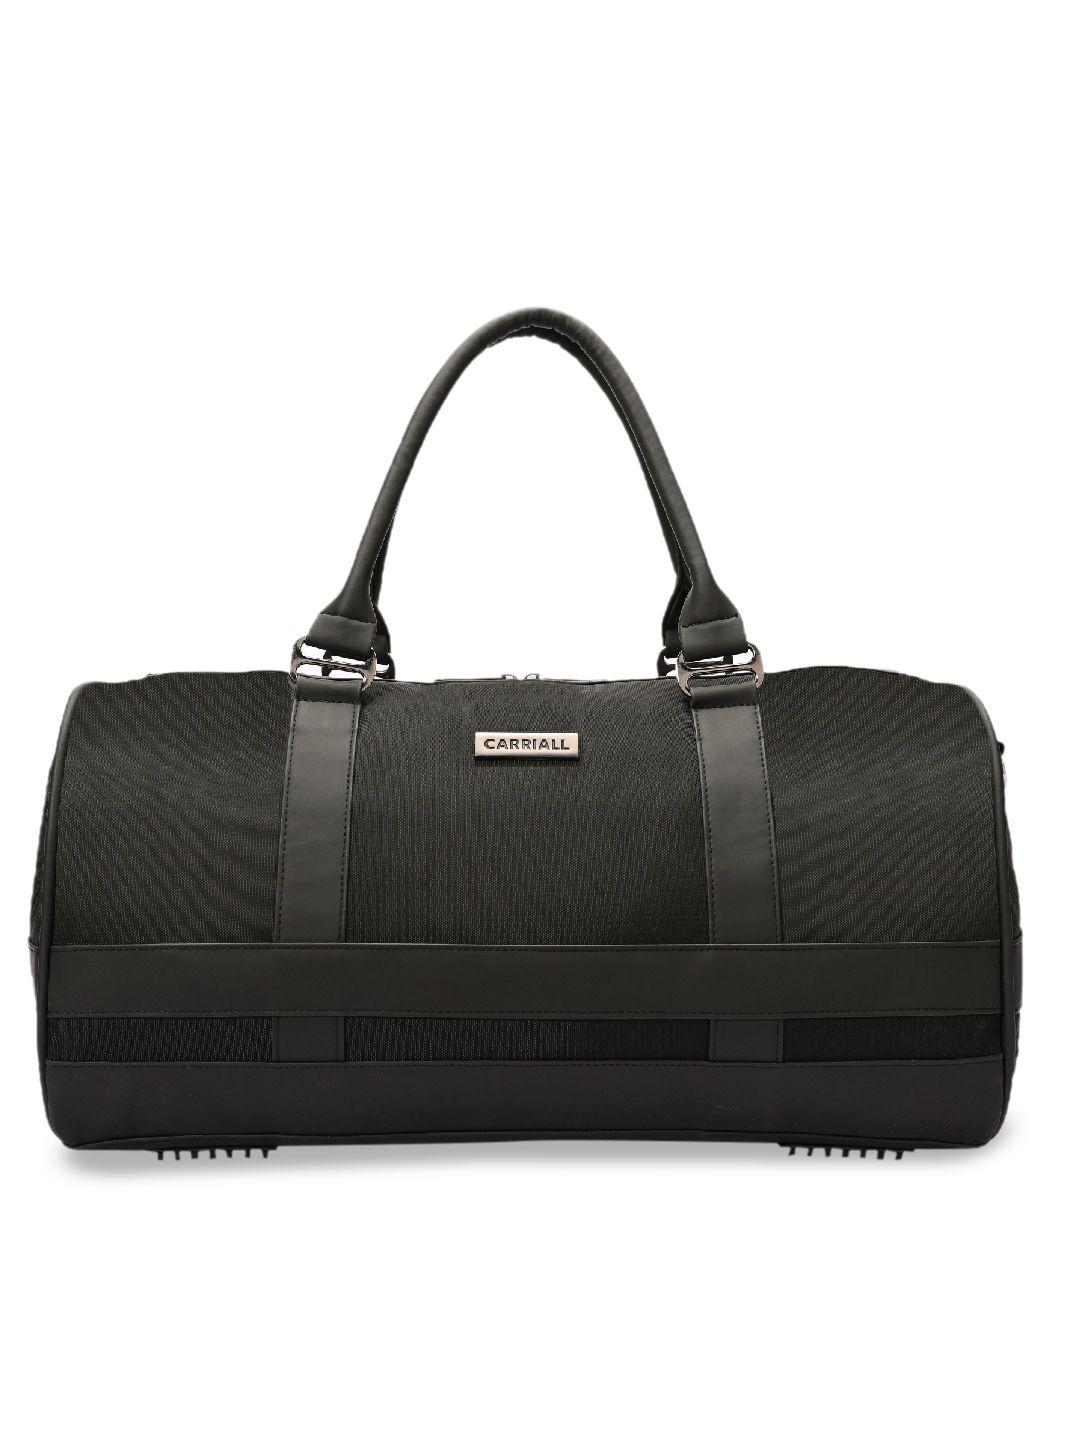 carriall textured travel duffel bag